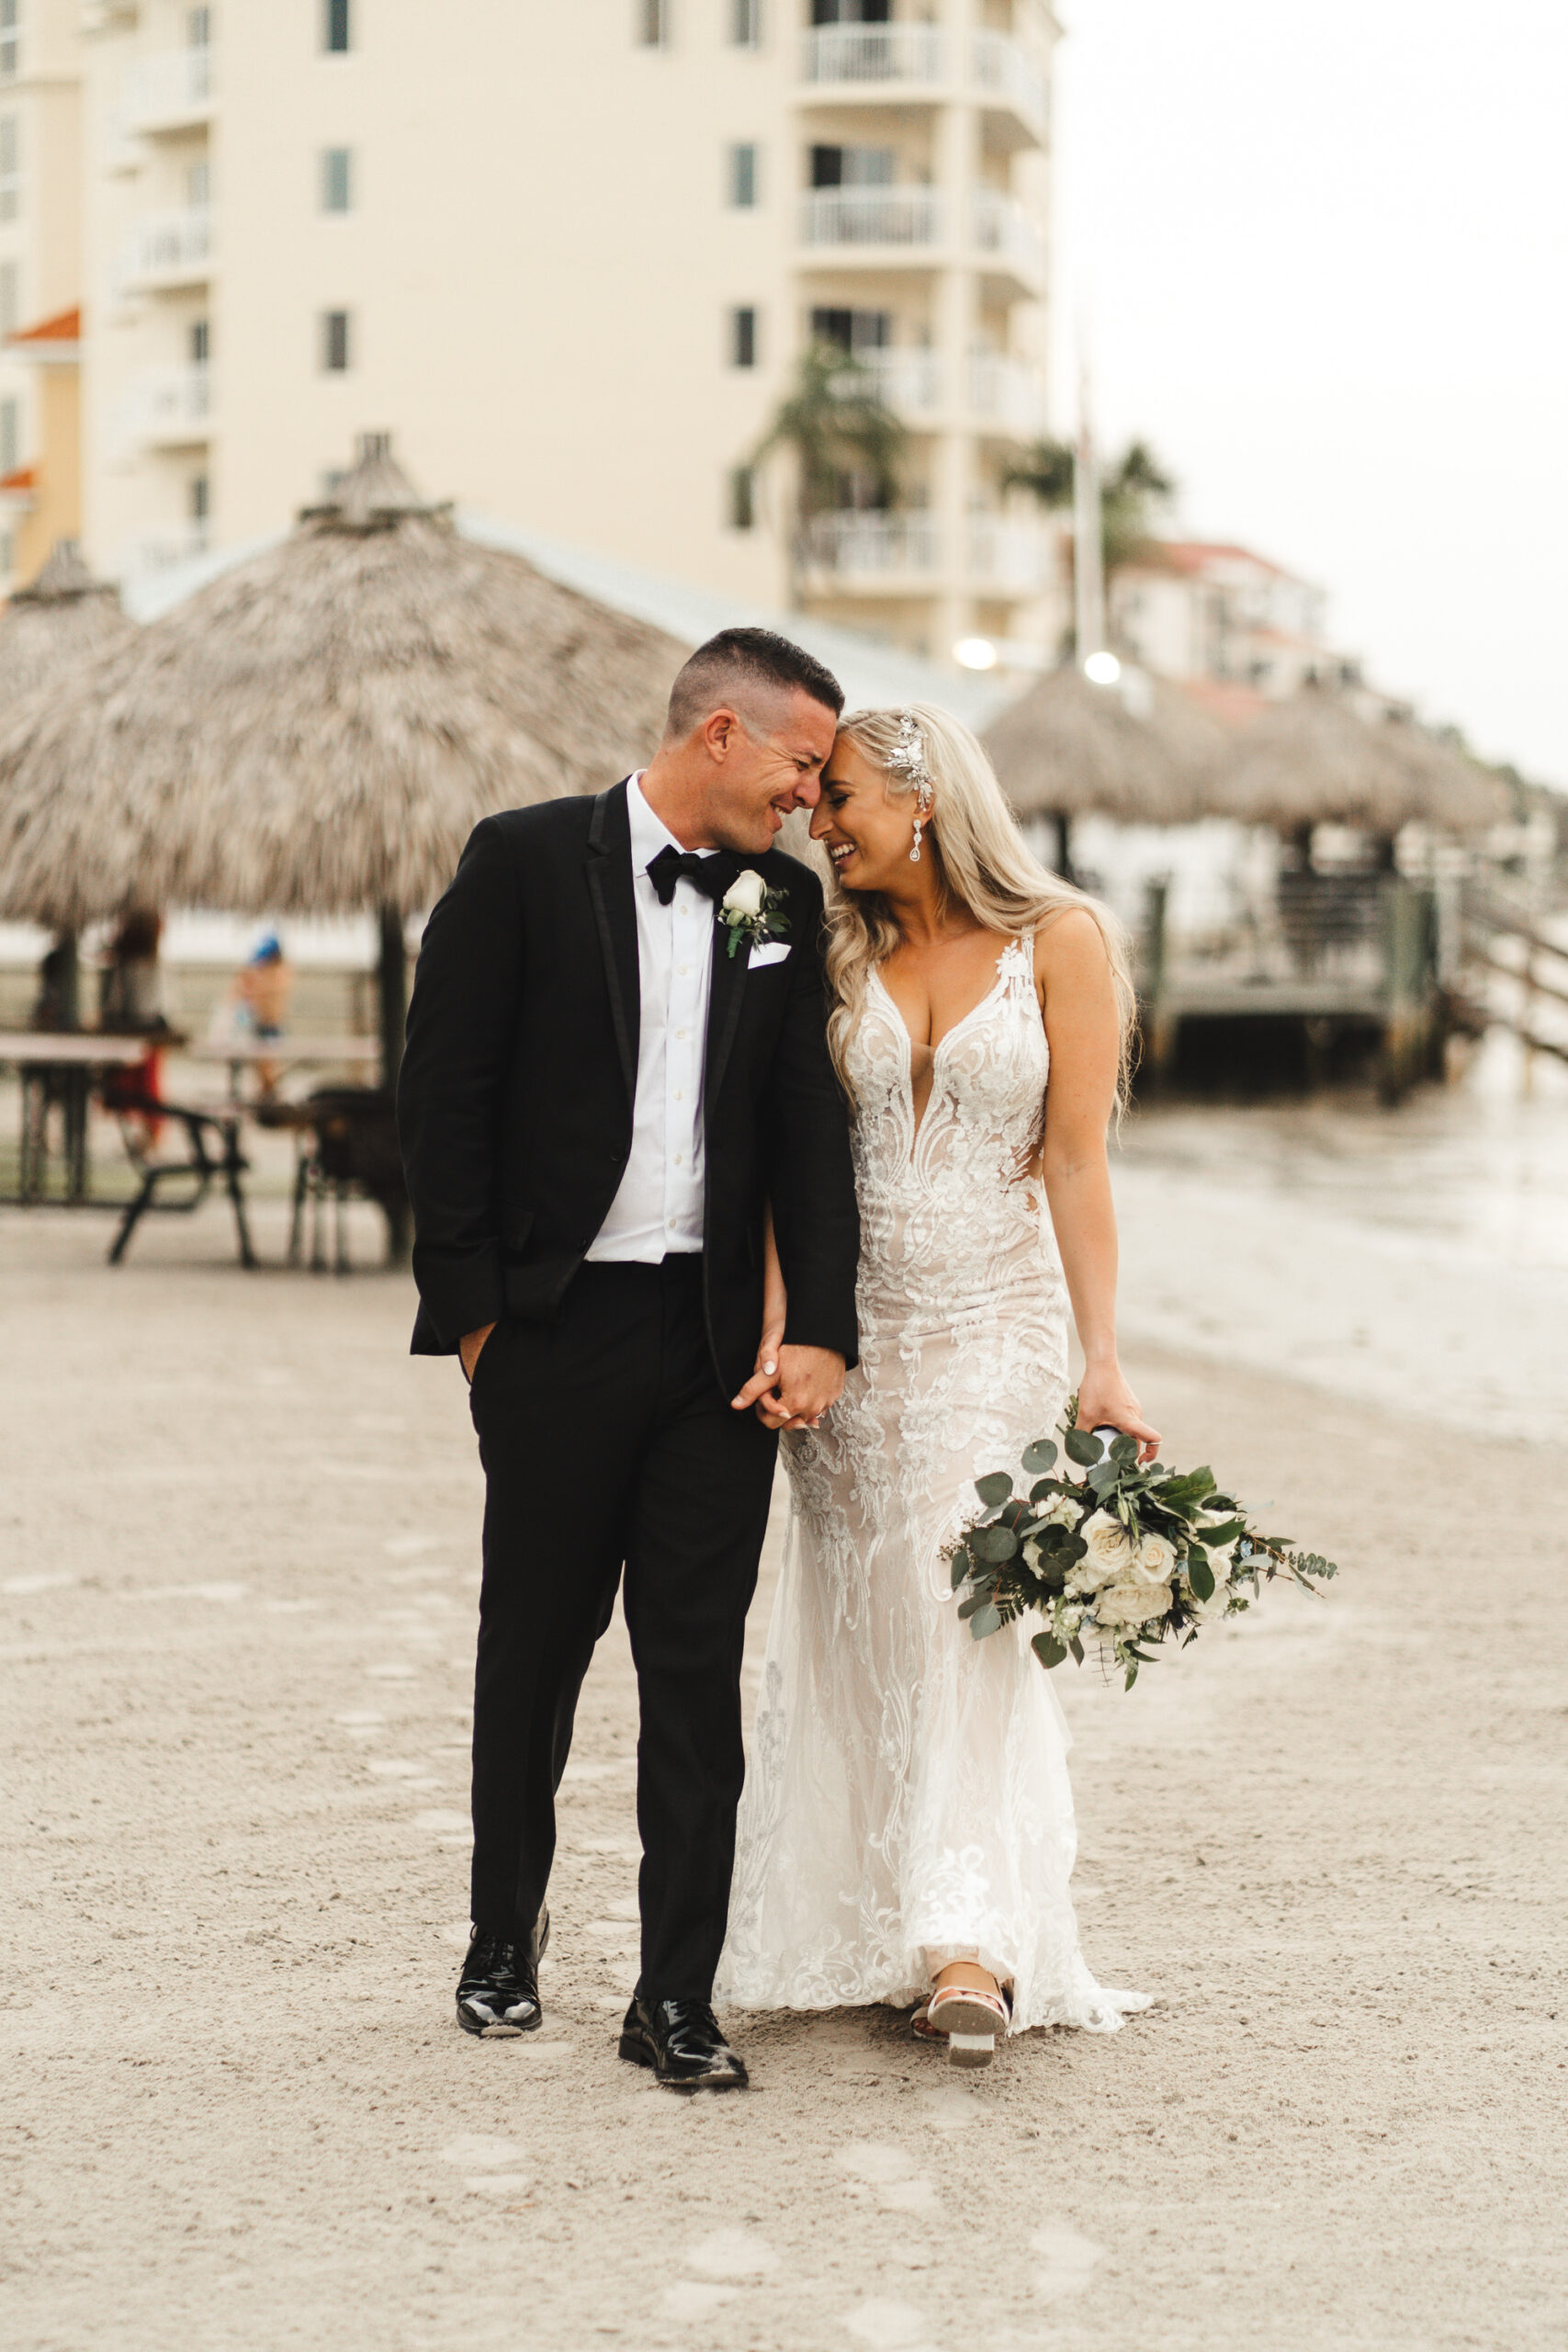 Intimate Moments with Bride and Groom Walking on the Beach | St. Petersburg Wedding Photographer Videographer J&S Media